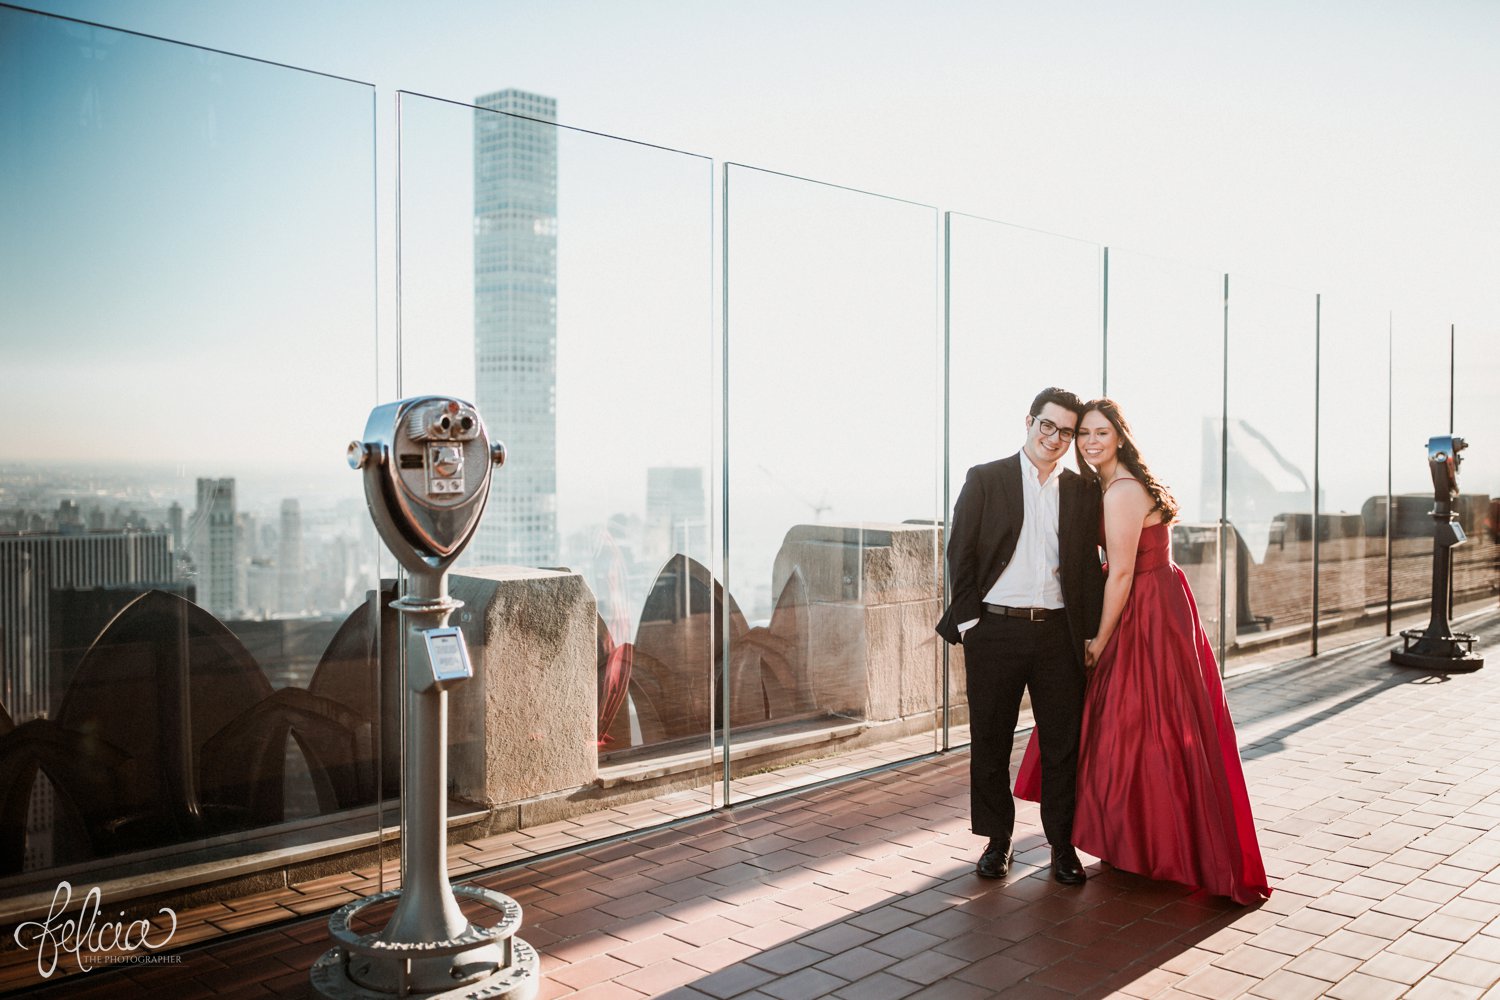 images by feliciathephotographer.com | destination wedding photographer | engagement | new york city | skyline | downtown | urban | formal | classic | elegant | long red gown | suit and tie | top of the rock | sunrise | elegant | glam | kiss | romantic |